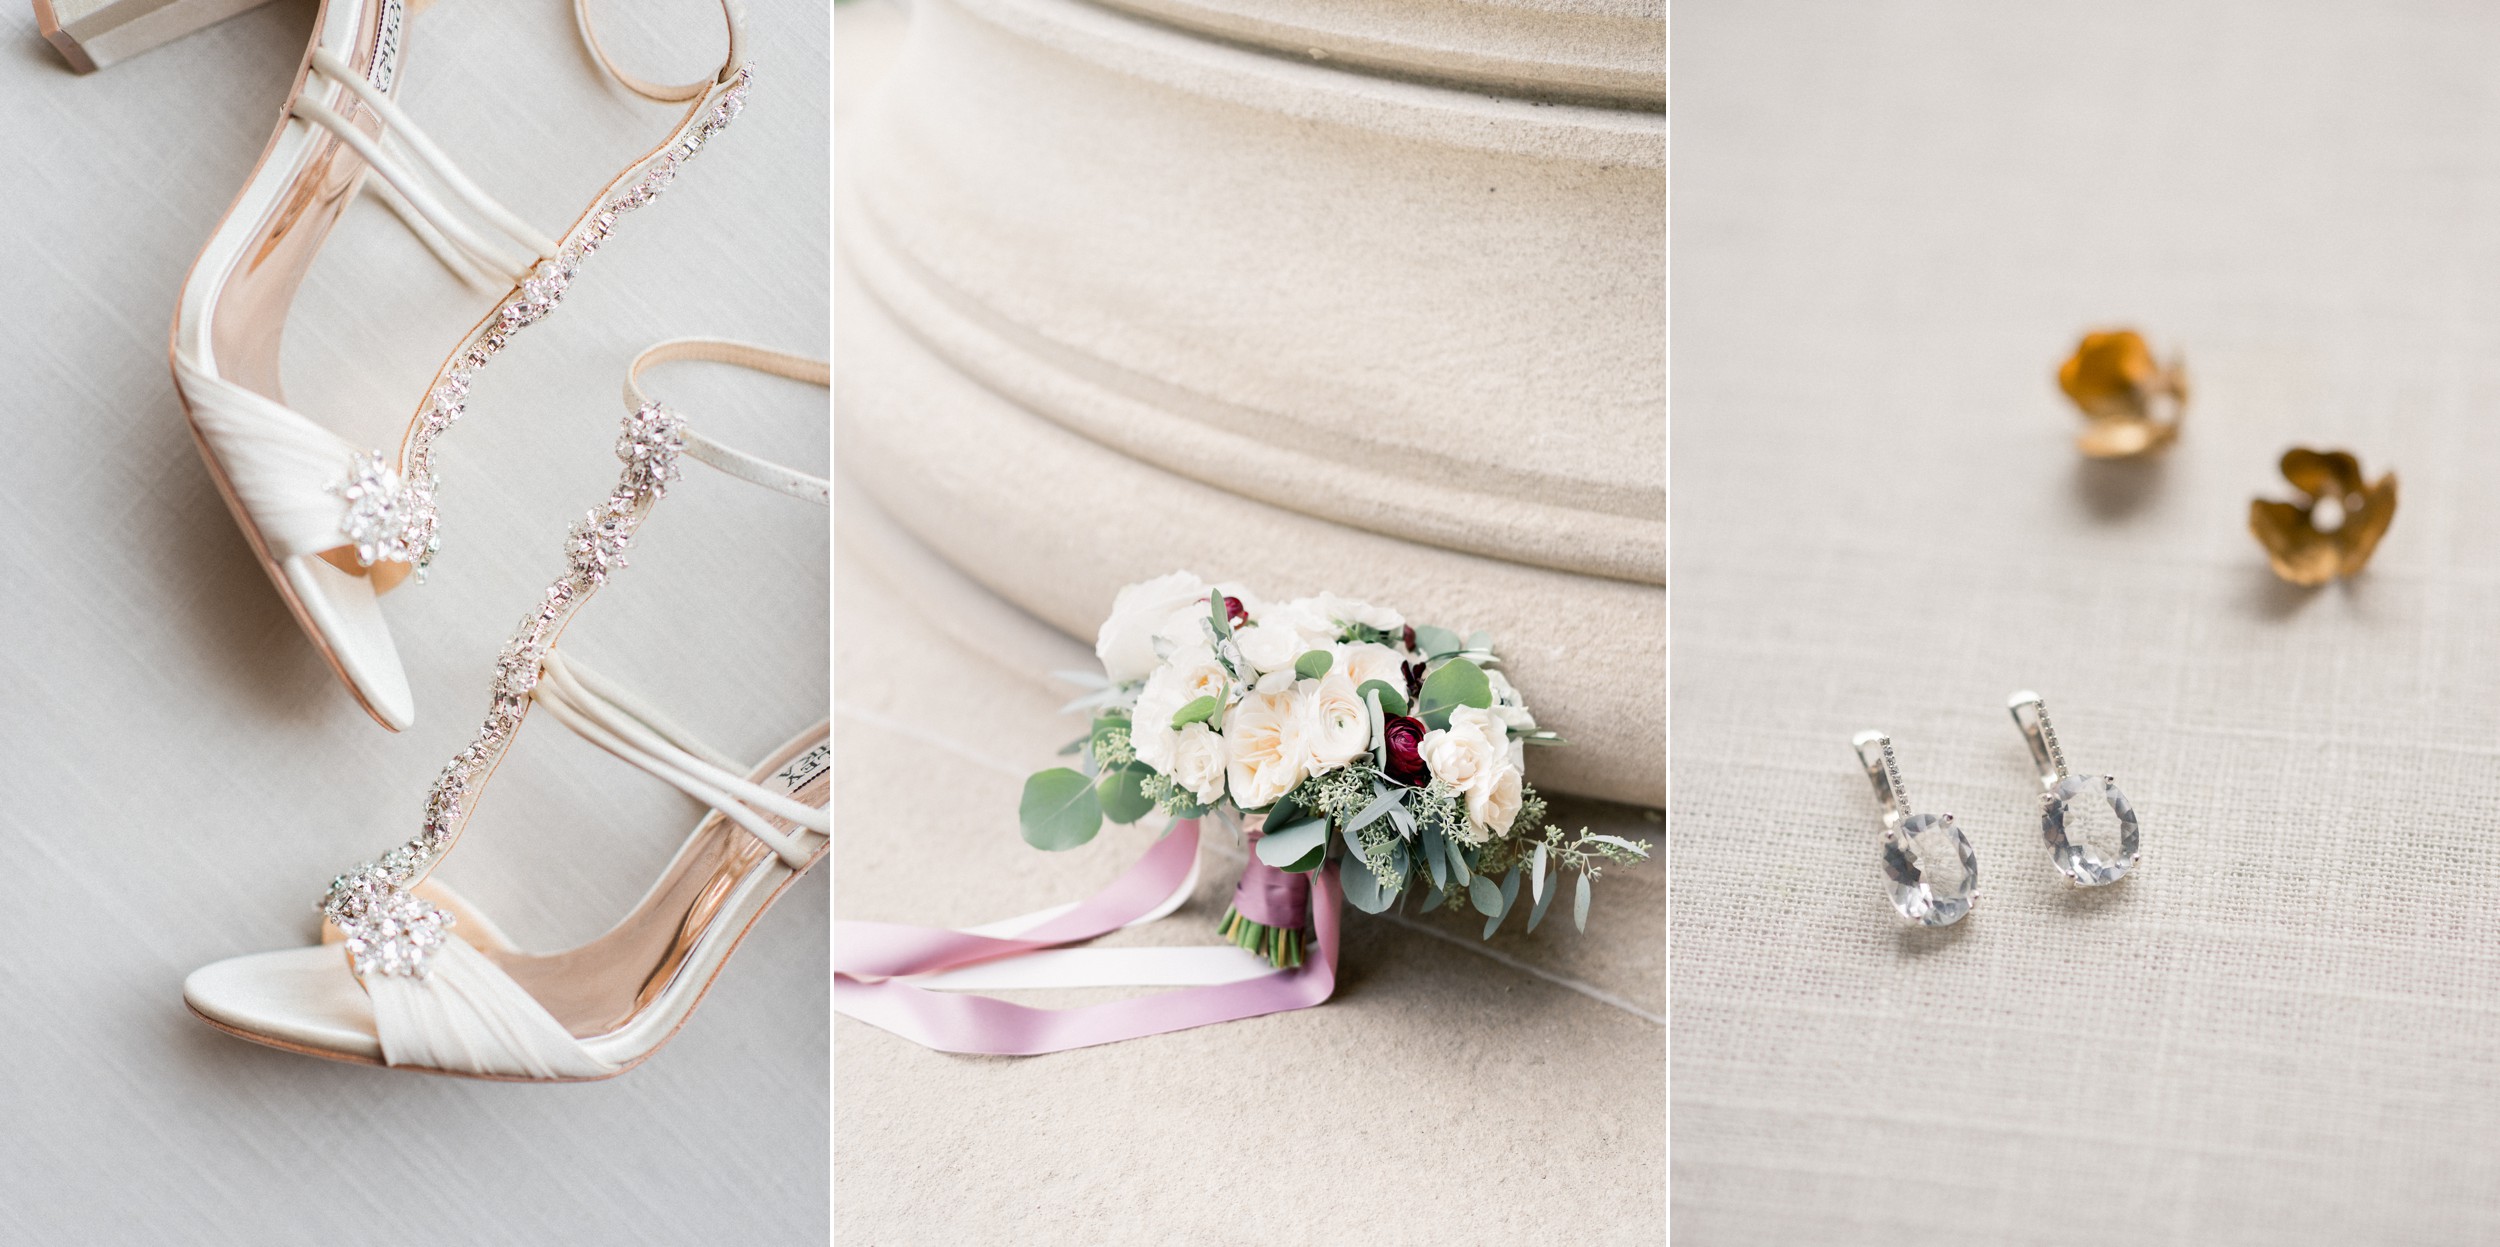 Boston Bridal Details for black tie city wedding in blush and cranberry